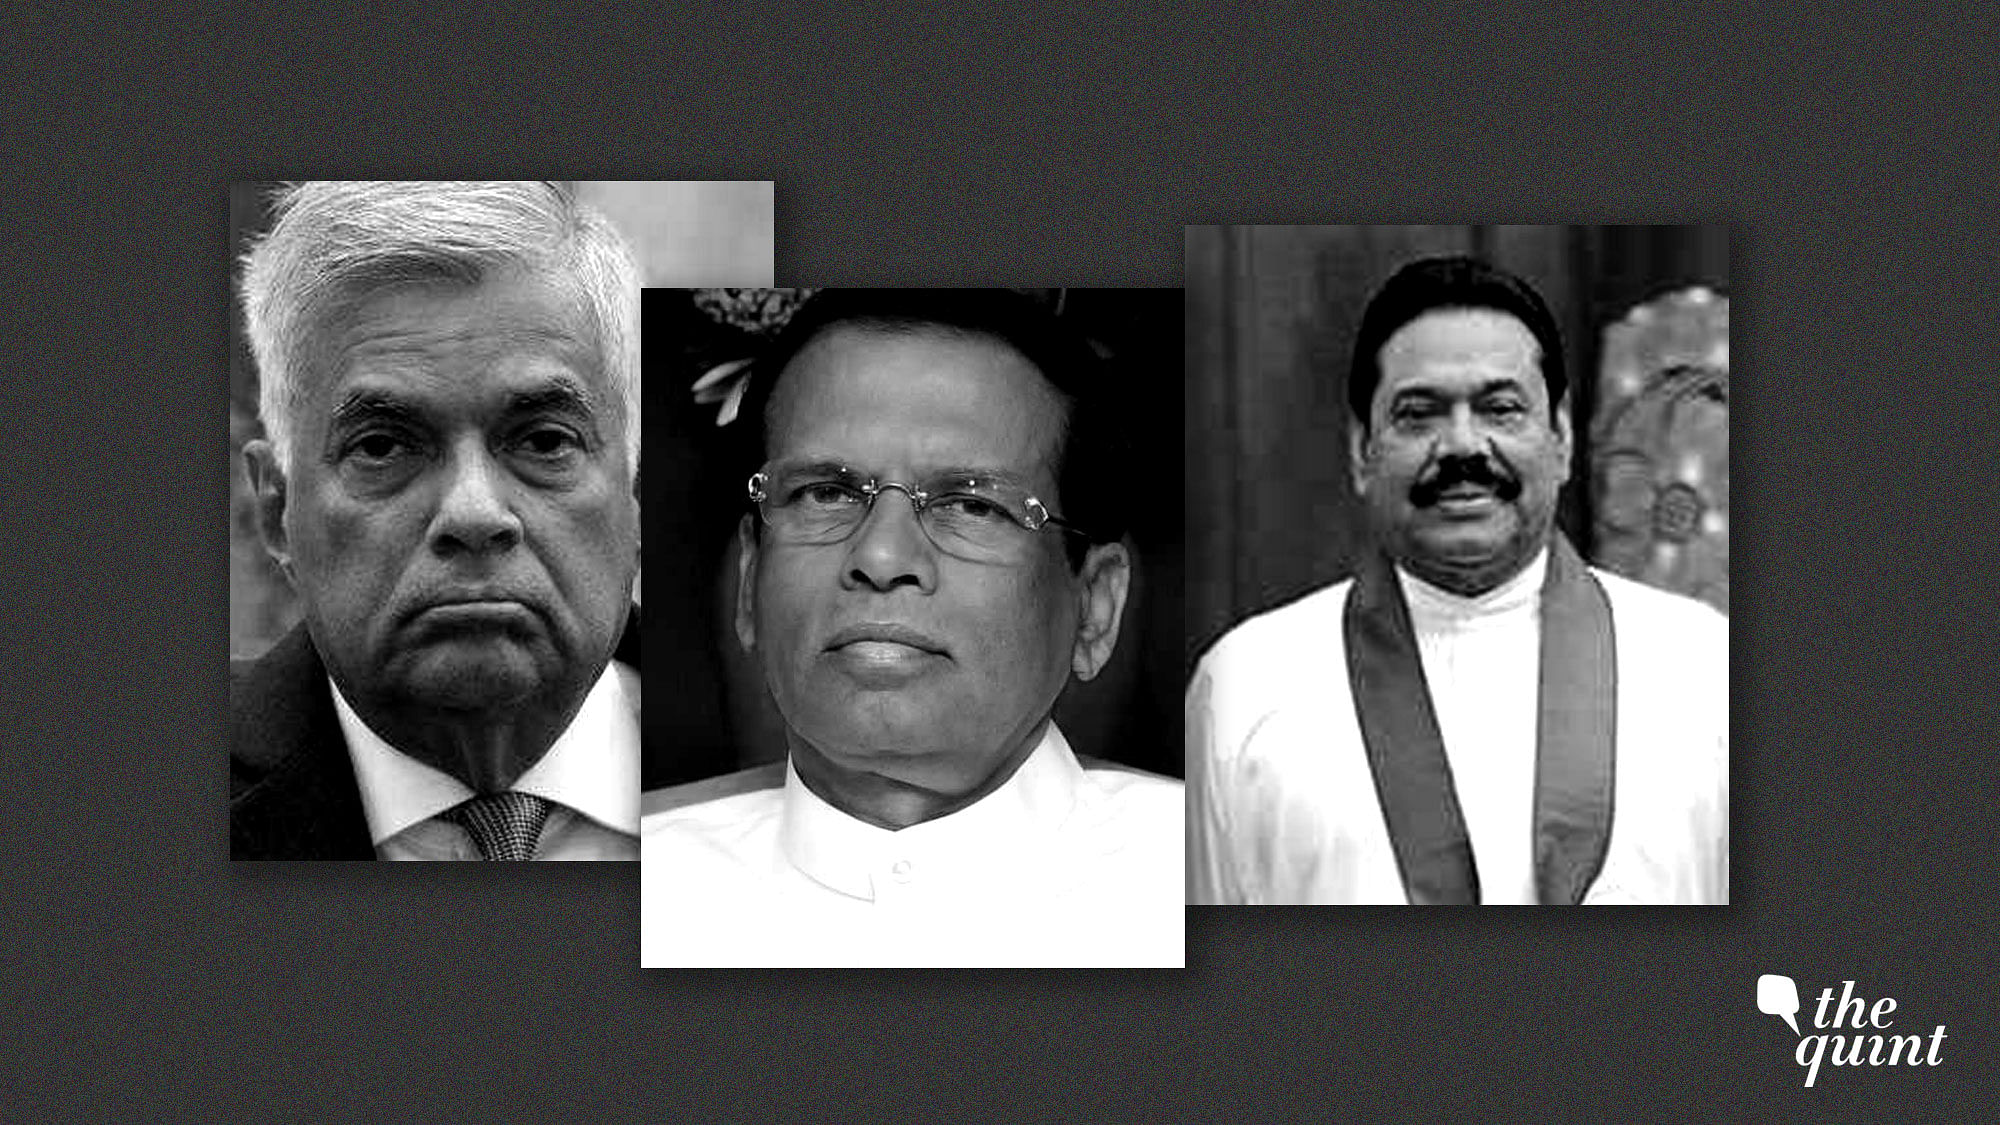 The collapse of Sri Lanka’s first-ever coalition government, and the events that unfolded after 26 October, has put the island nation back under political turmoil.